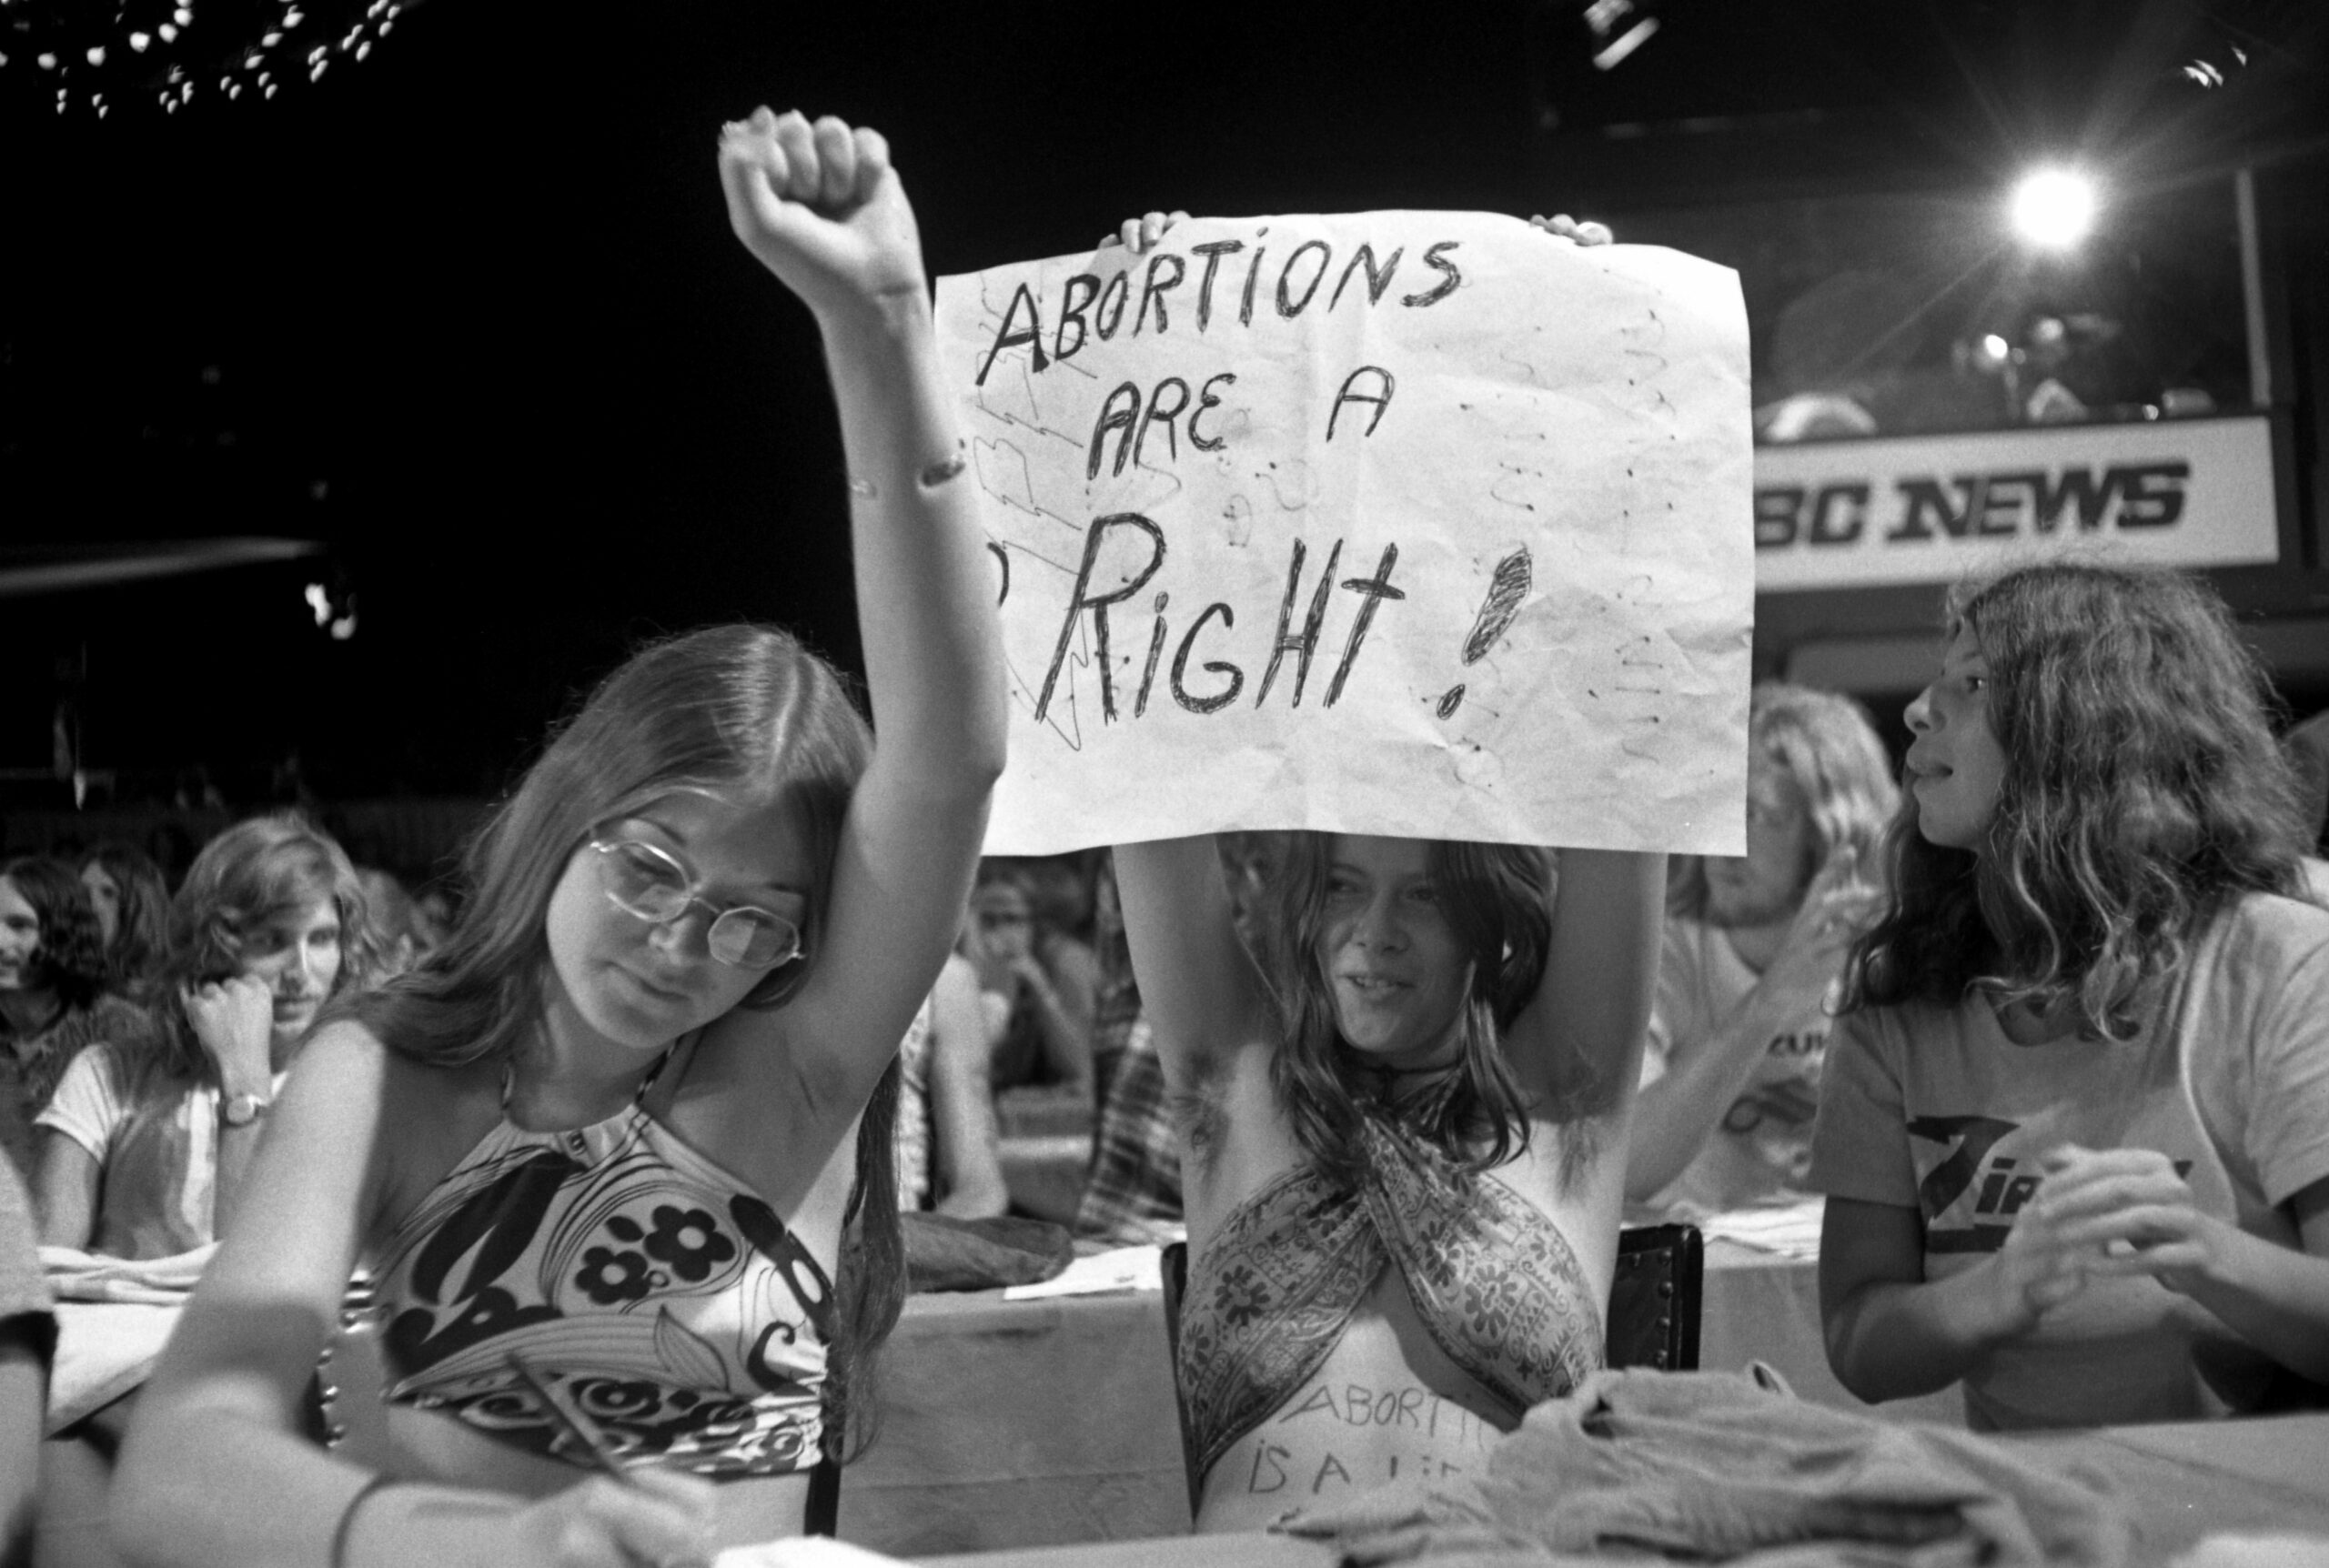 Protesters hold a sign that reads "Abortions are a right!"